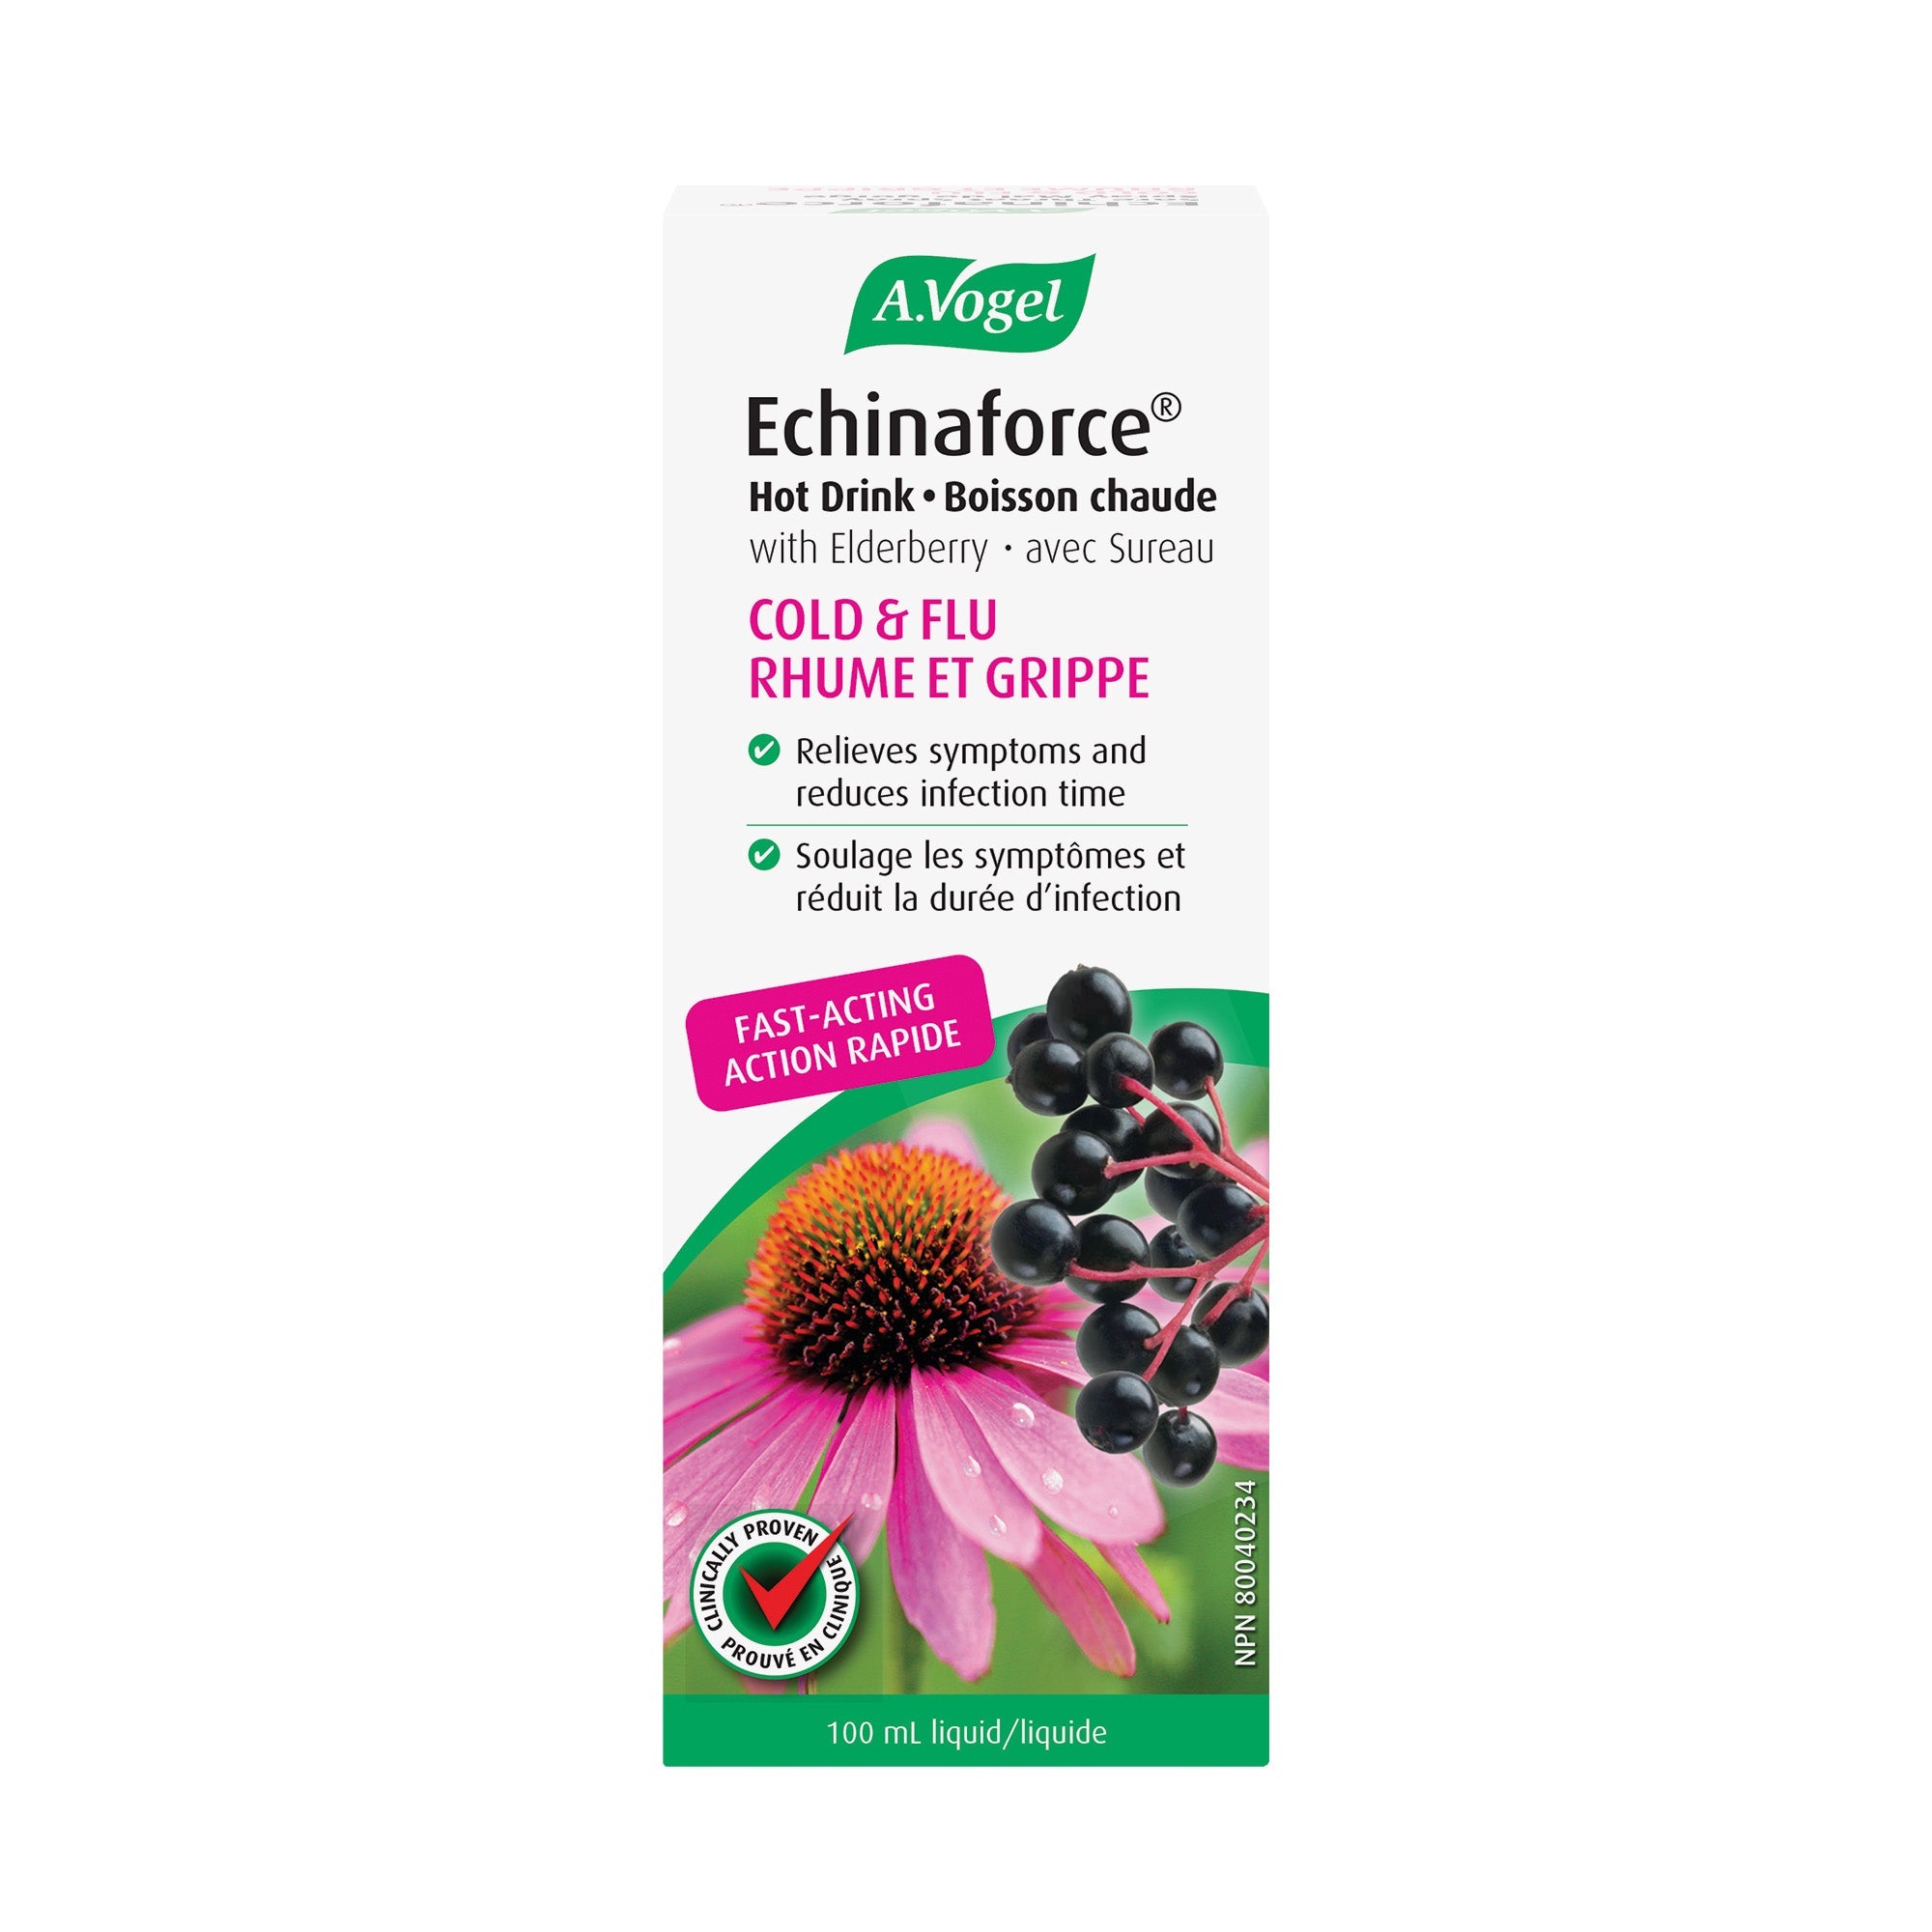 A.Vogel Echinaforce Extra Hot Drink with Elderberry - Immune System Support 100mL - A.Vogel Canada